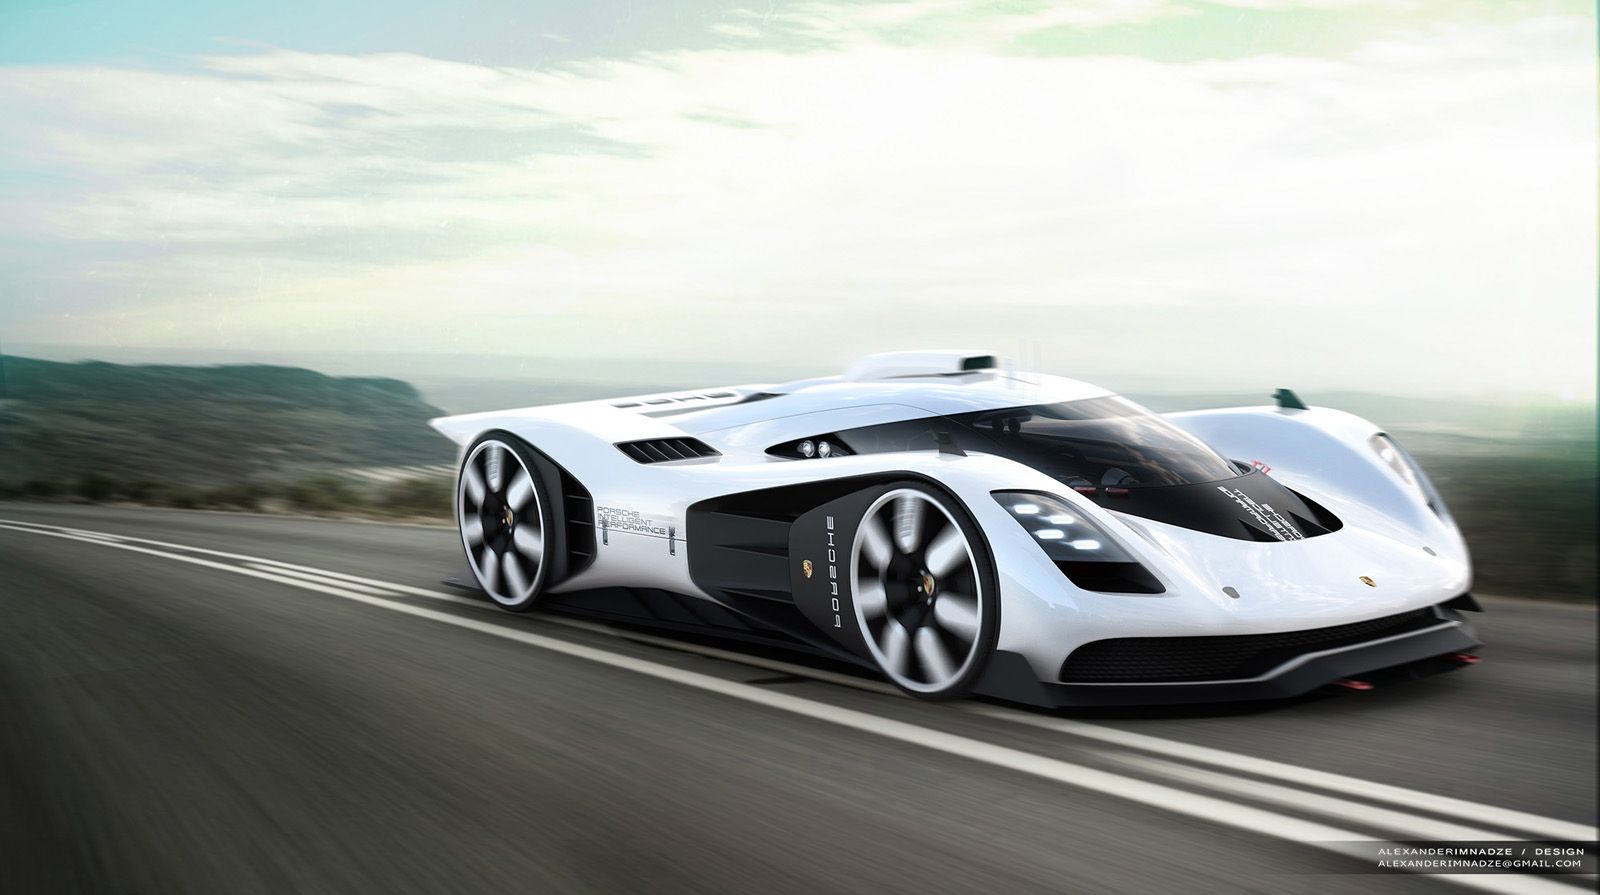 Porsche 906/917 Concept Is One Designer’s Stunning Vision For A Future Racer | Carscoops